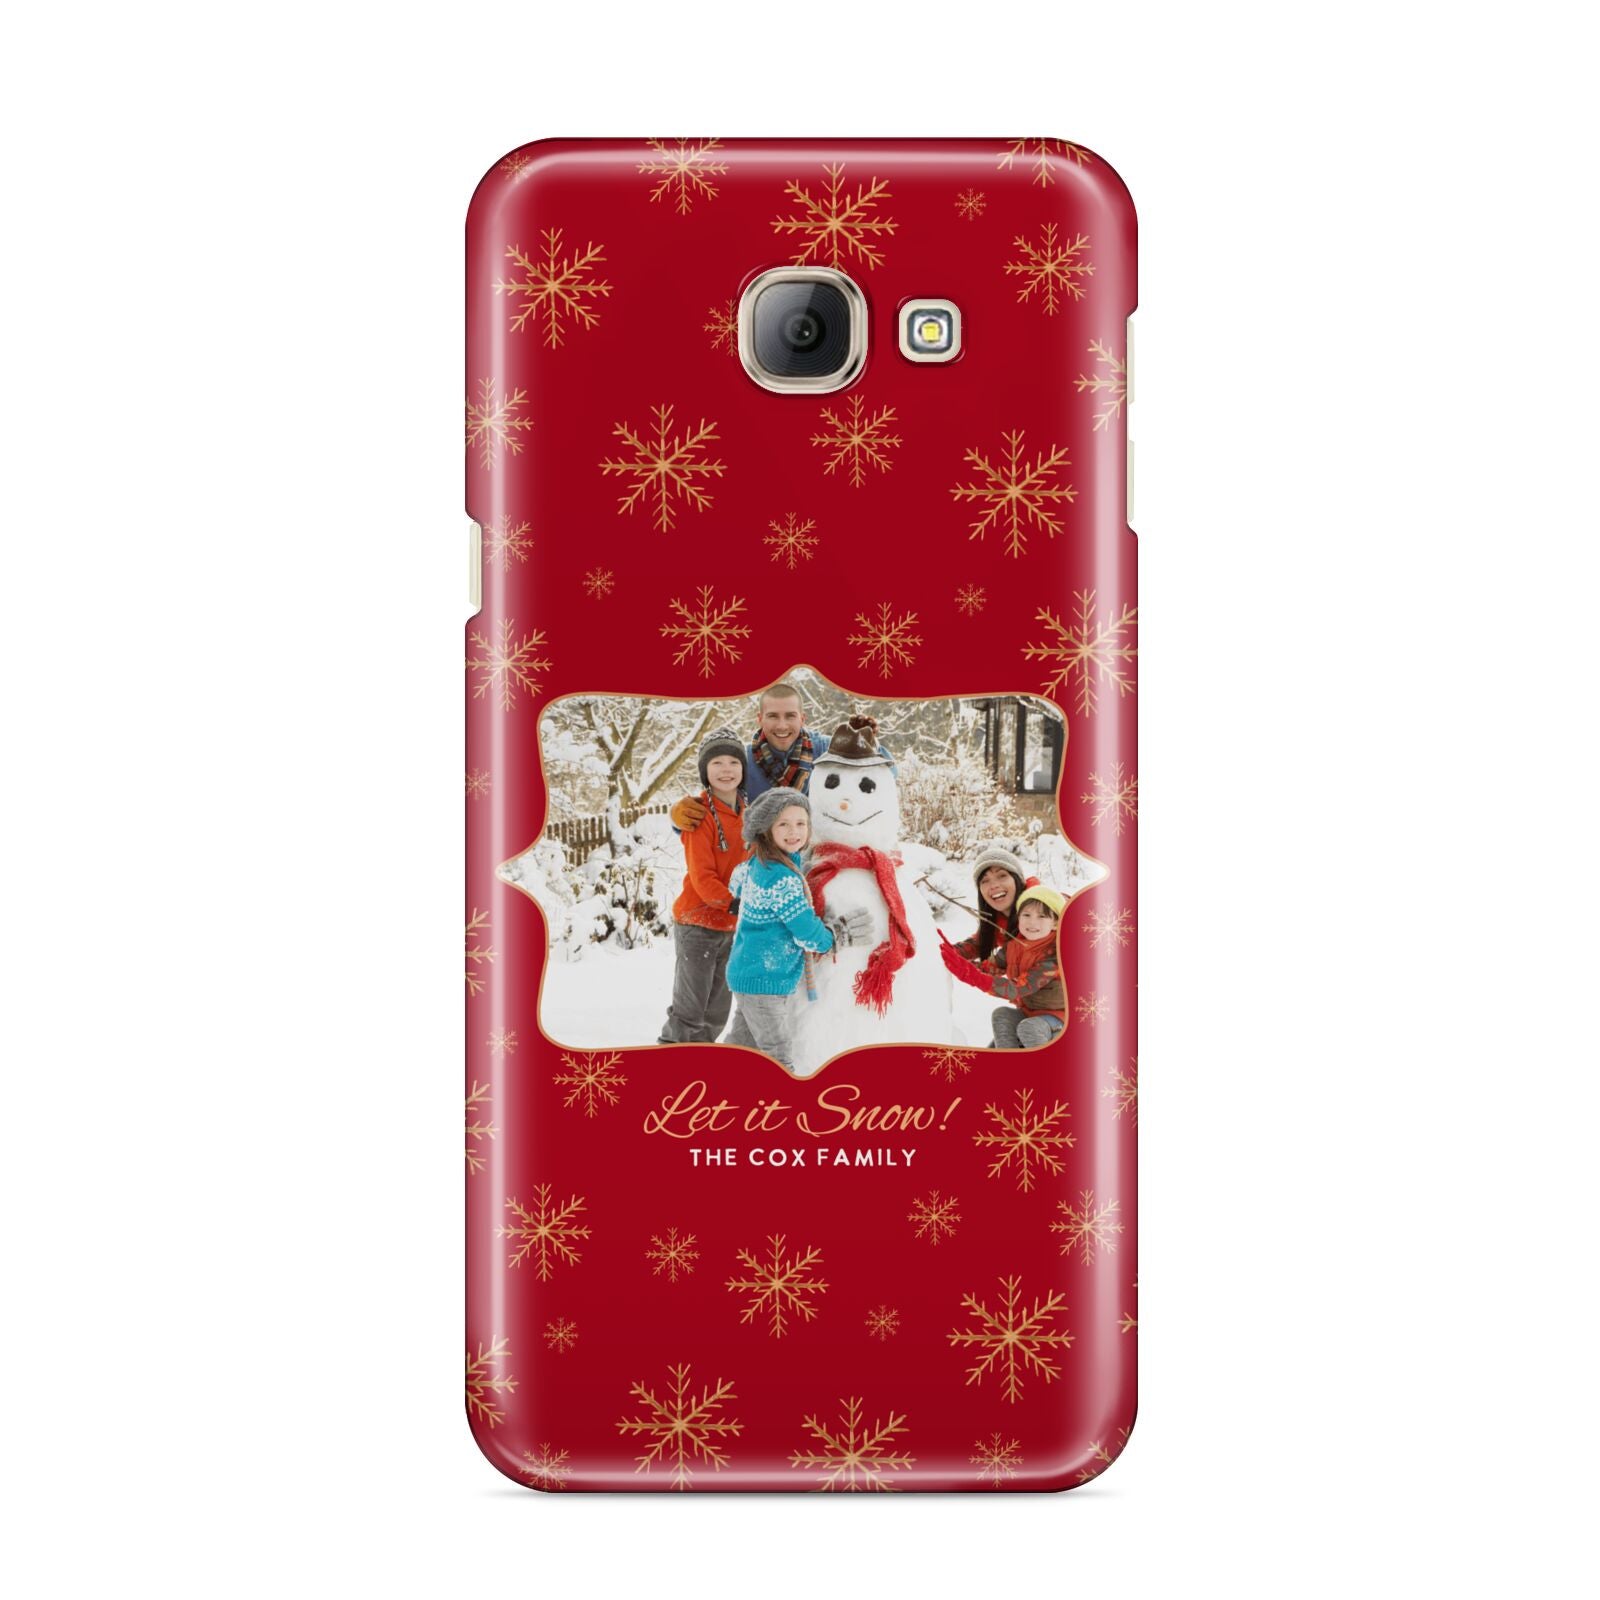 Let it Snow Christmas Photo Upload Samsung Galaxy A8 2016 Case